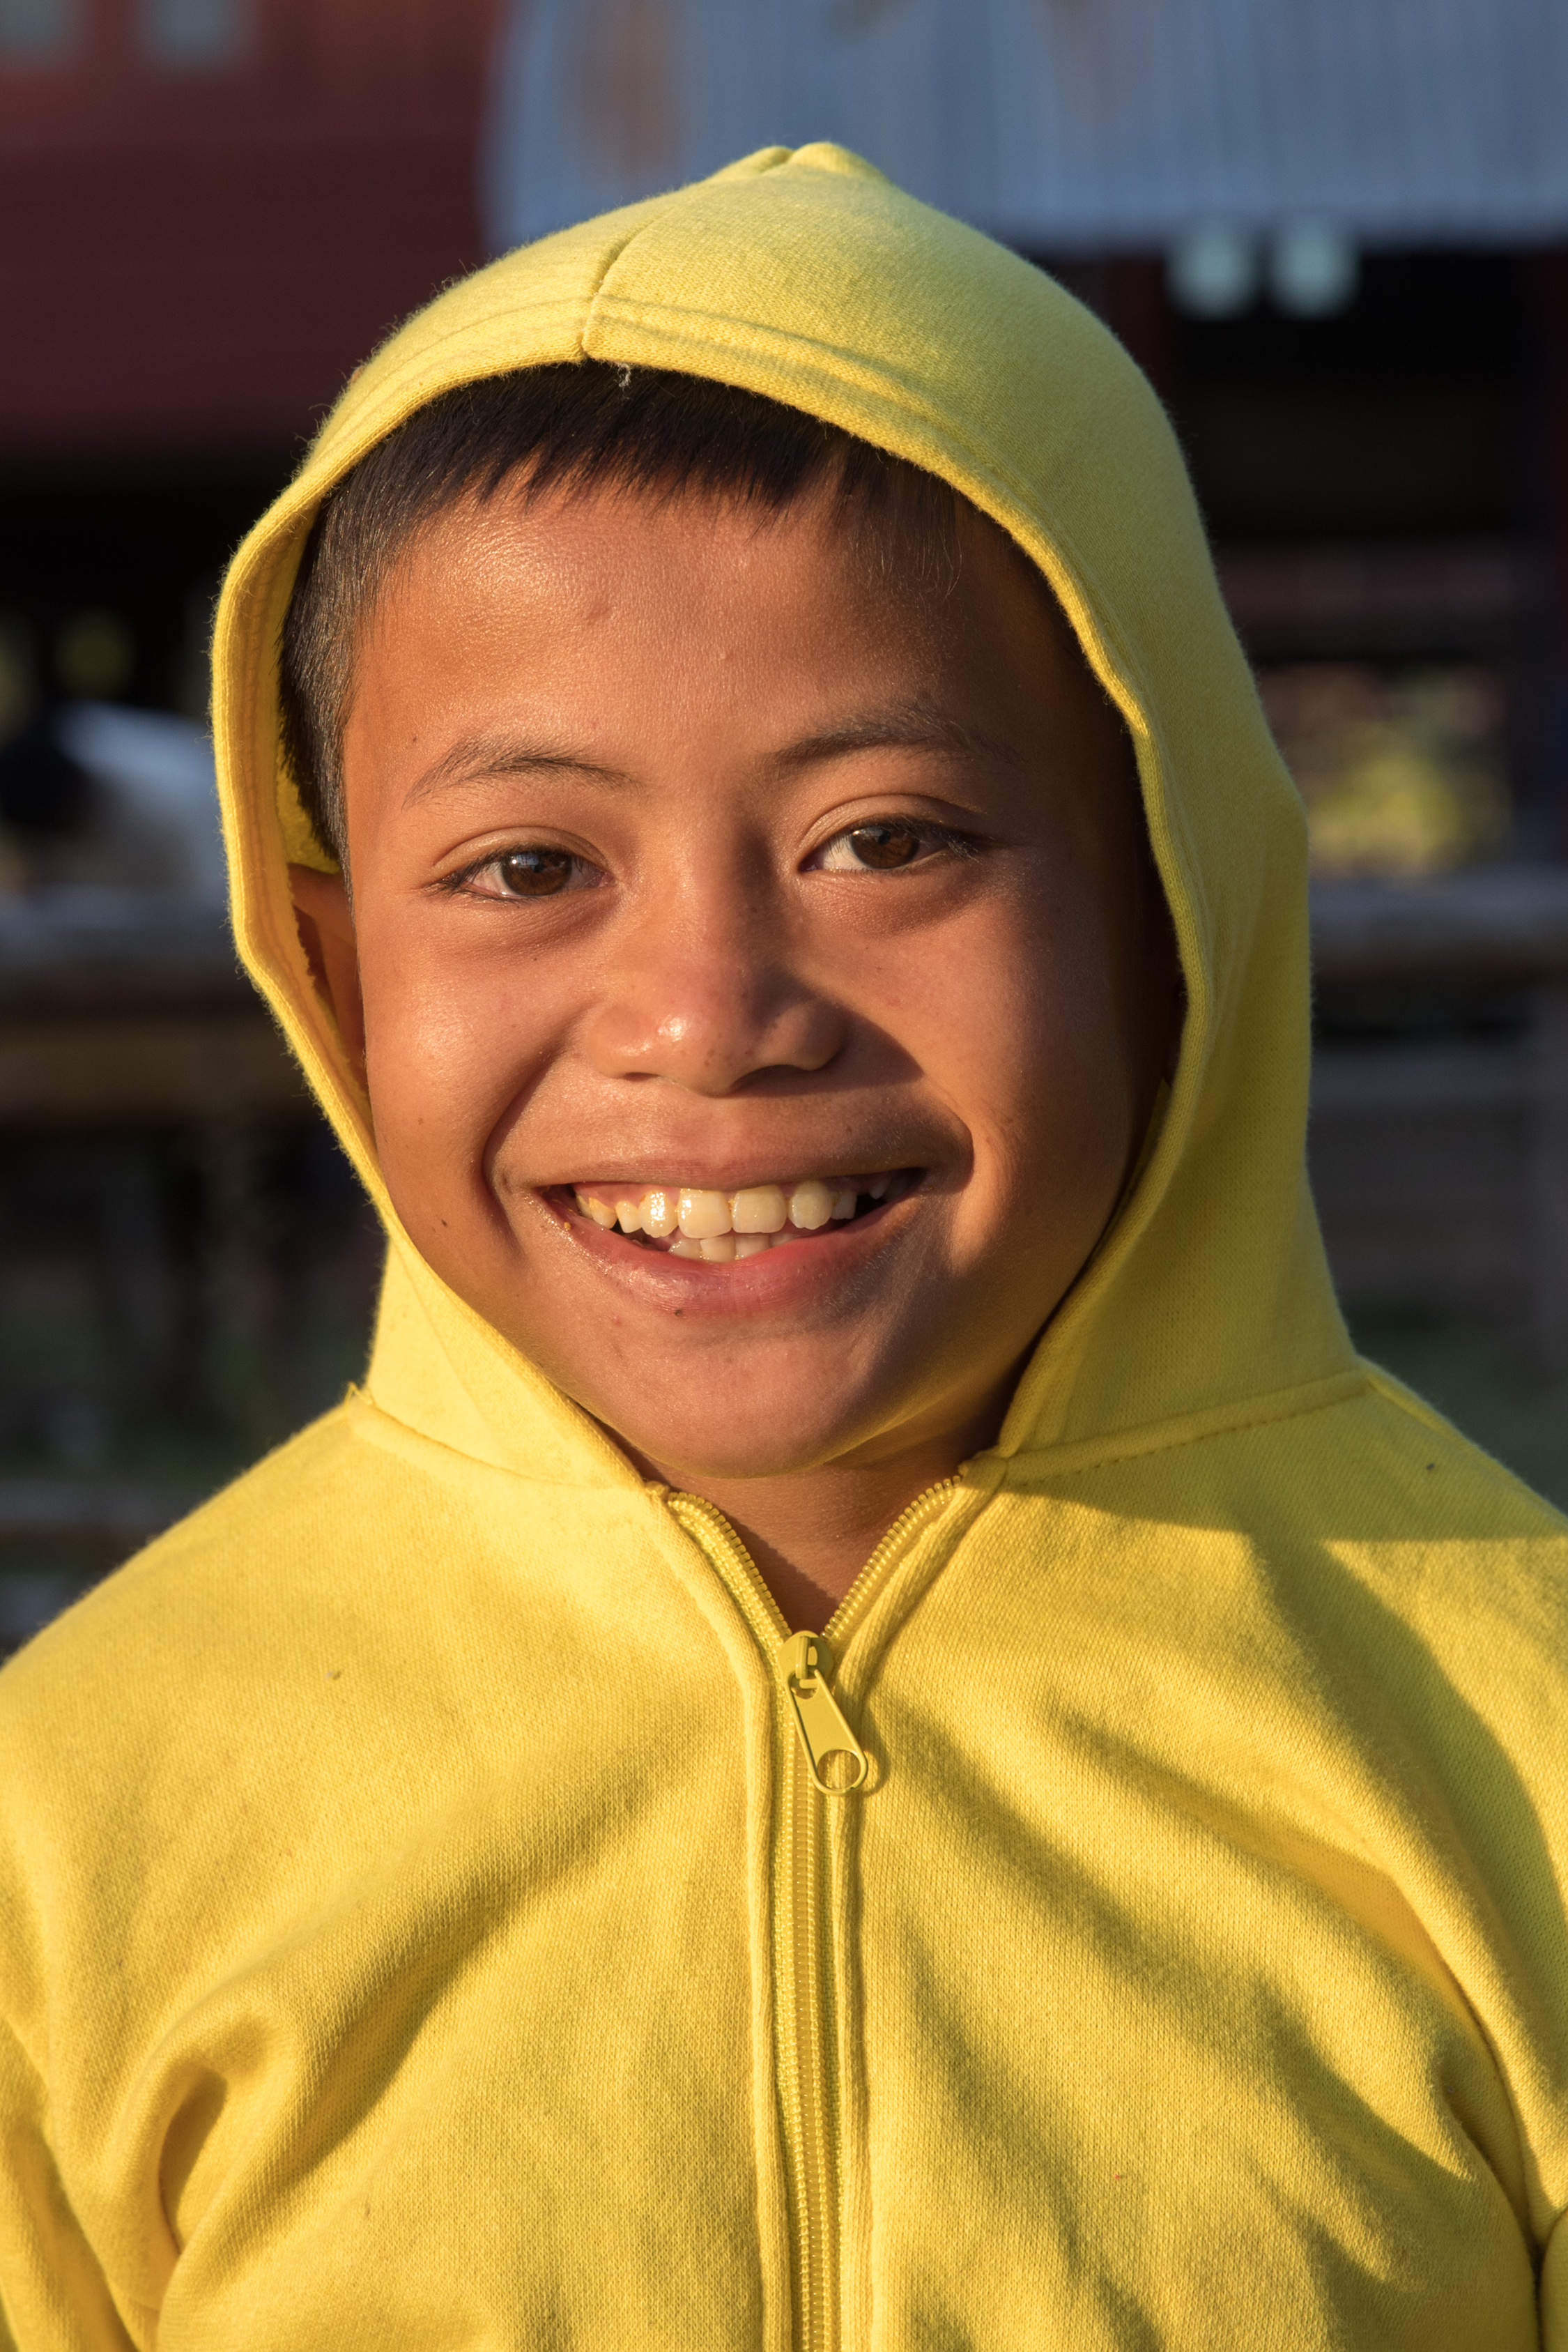 Portrait in sunshine at golden hour of a smiling boy wearing a yellow sweater with hood pulled up in Laos